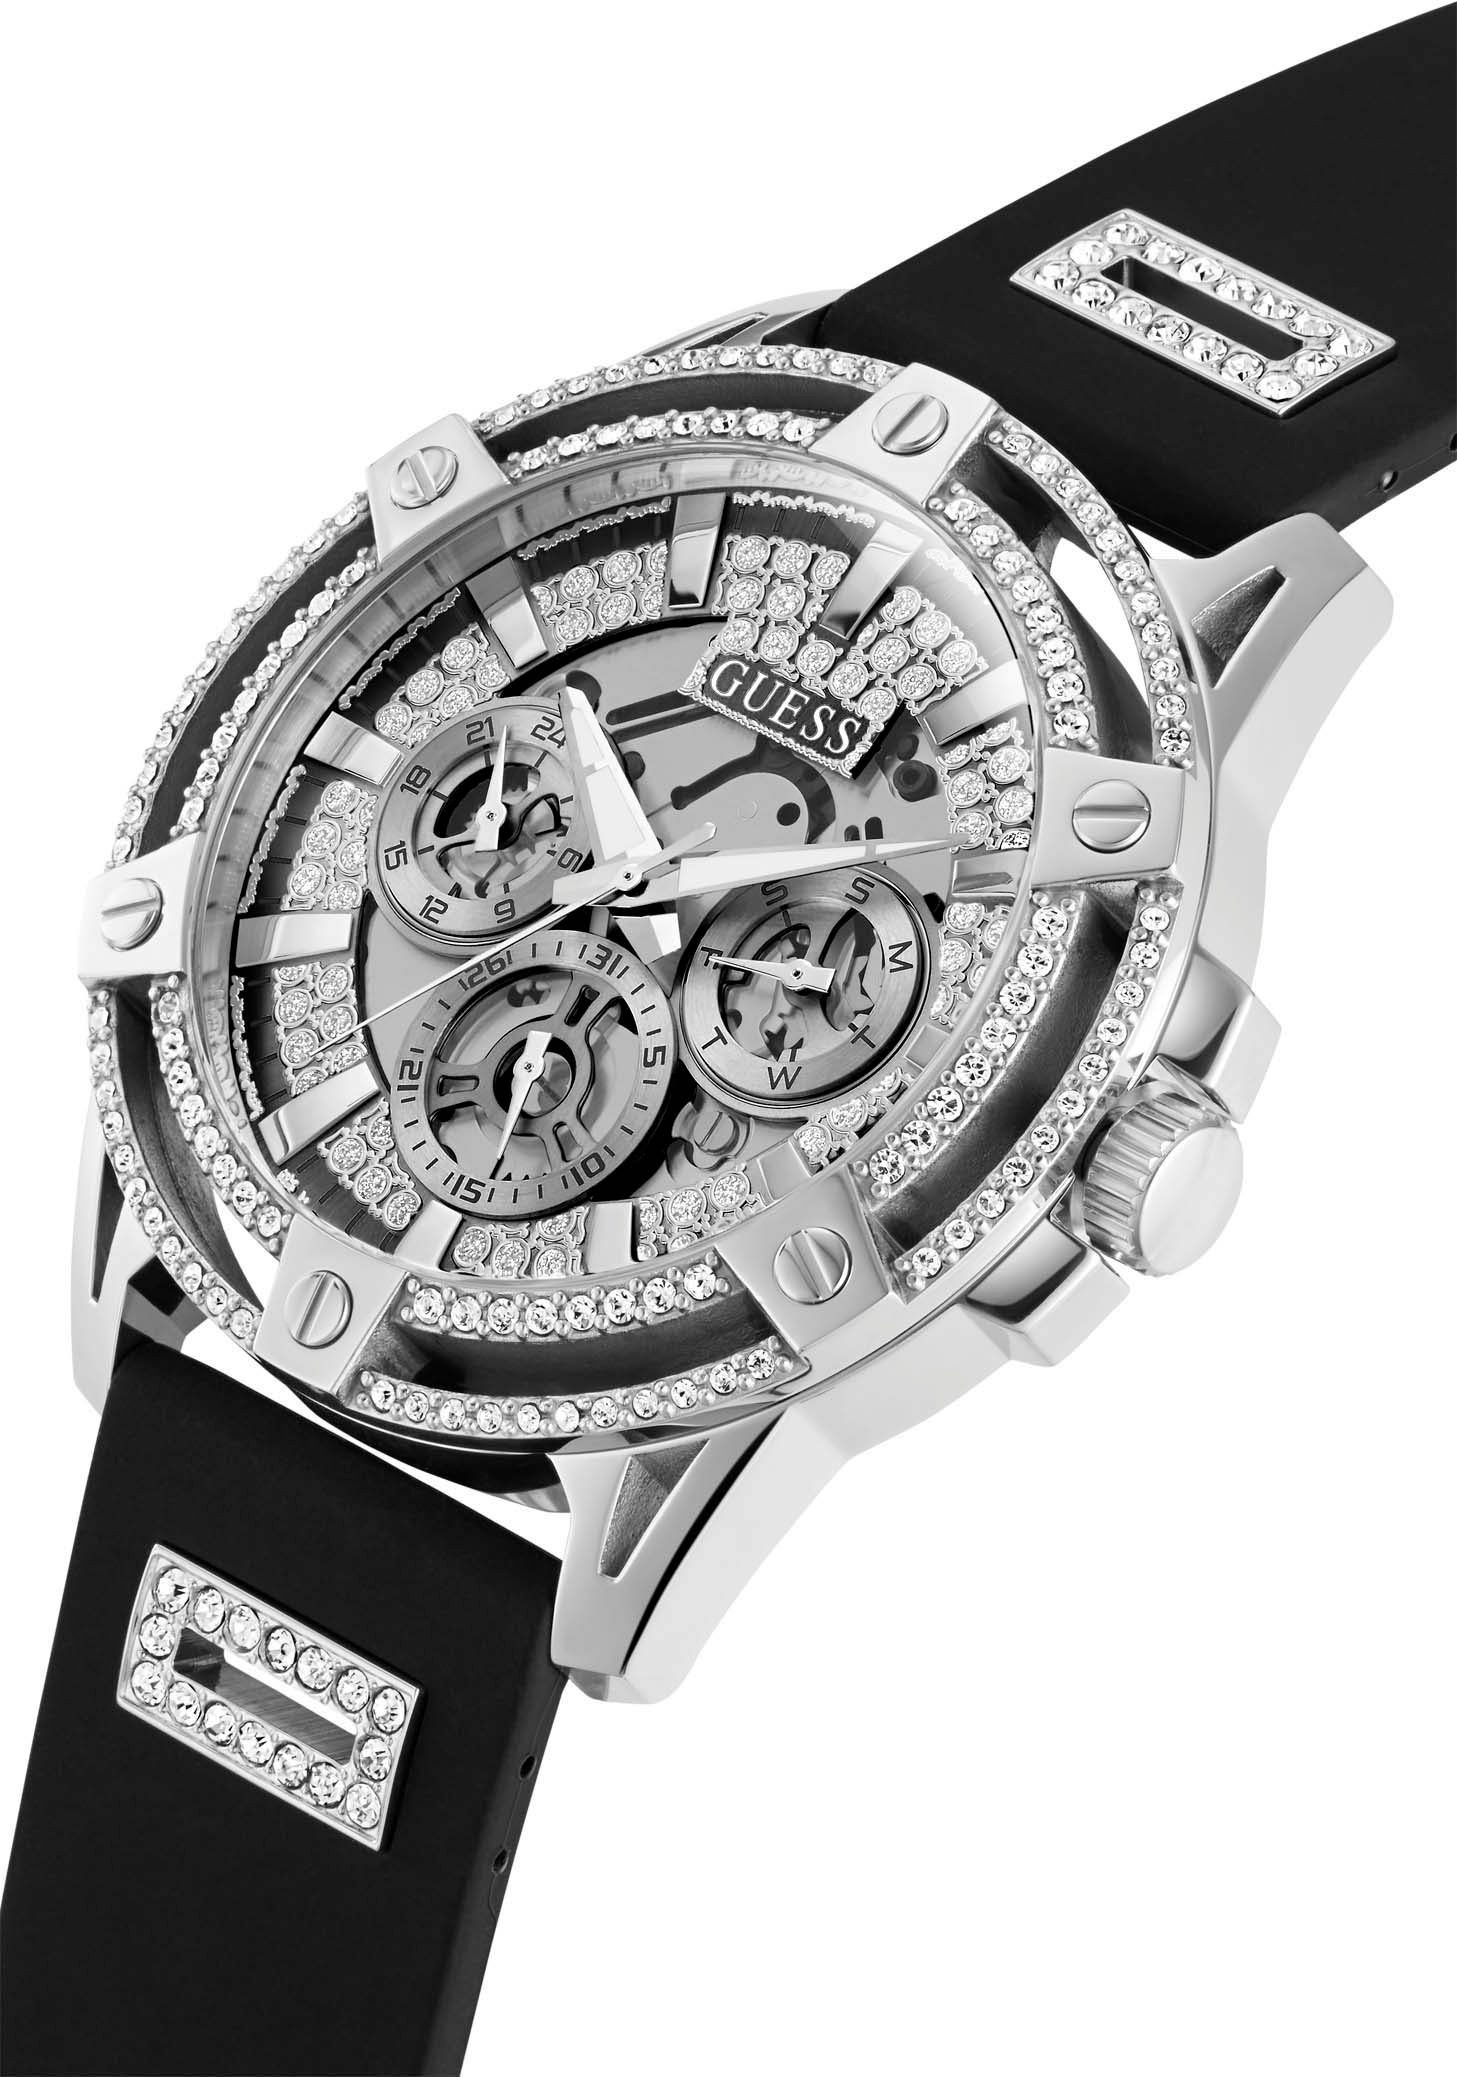 GW0537G1 Guess Multifunktionsuhr